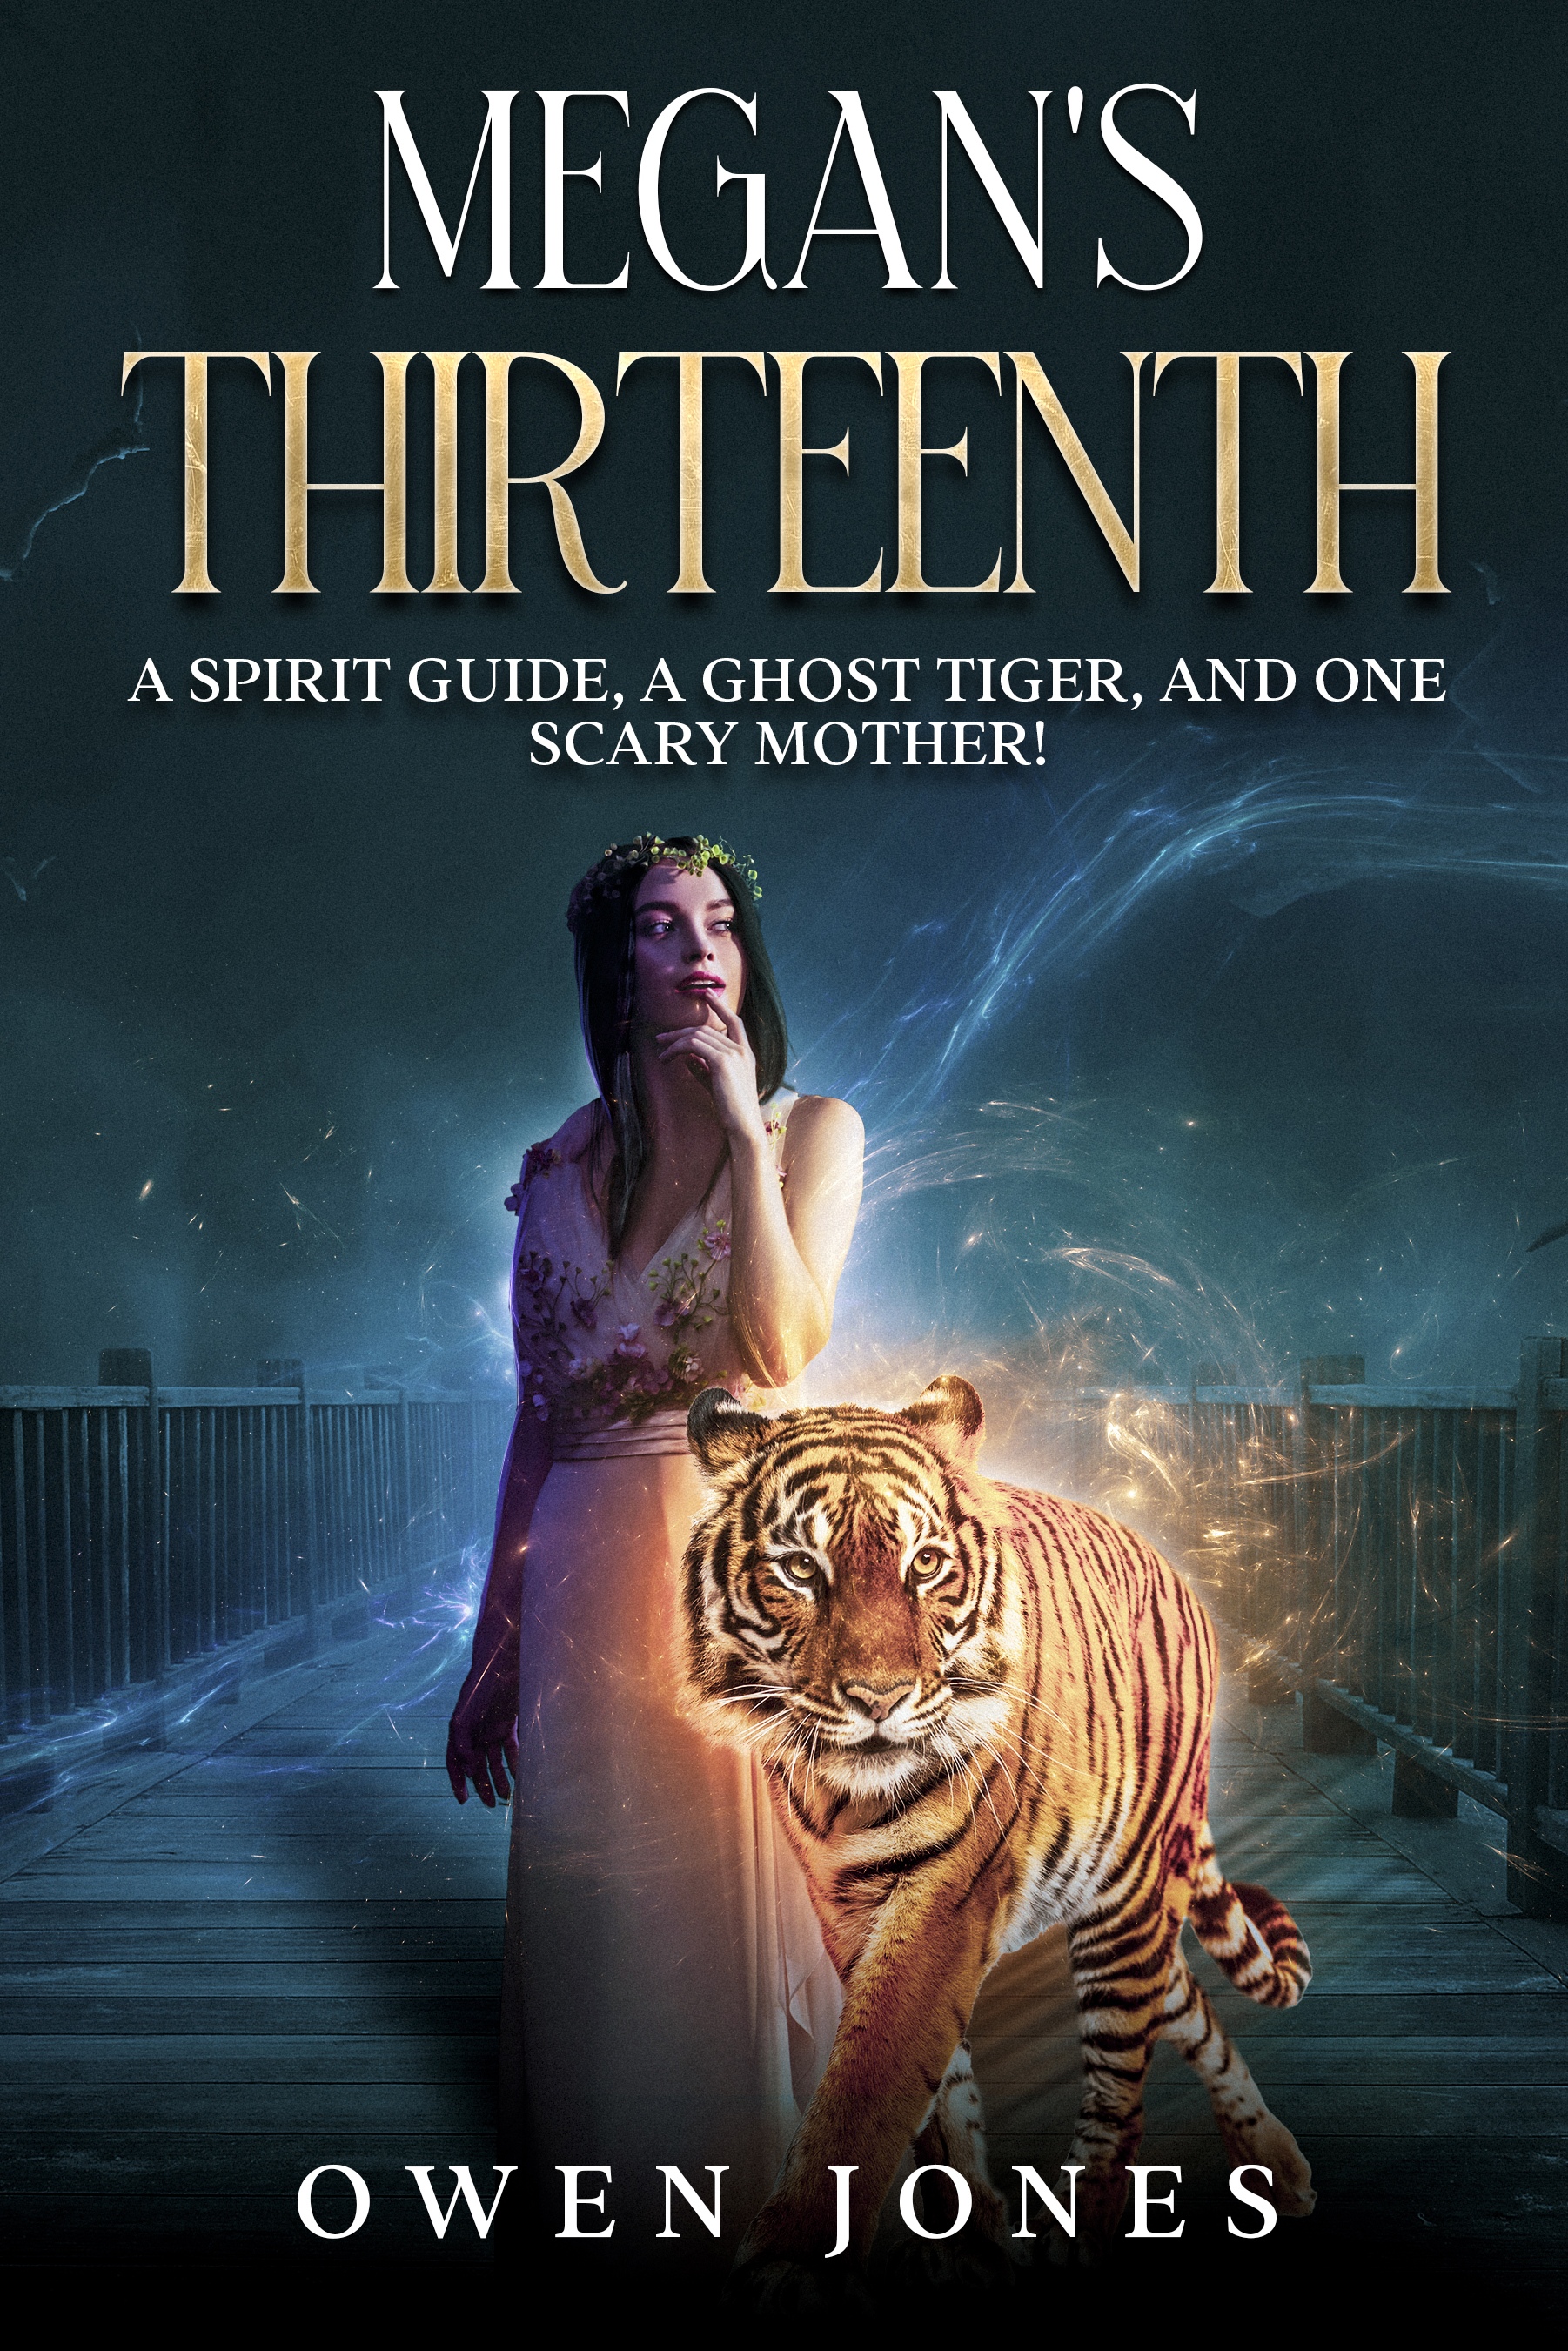 Megan's Thirteenth-A Spirit Guide, A Ghost Tiger And One Scary Mother!